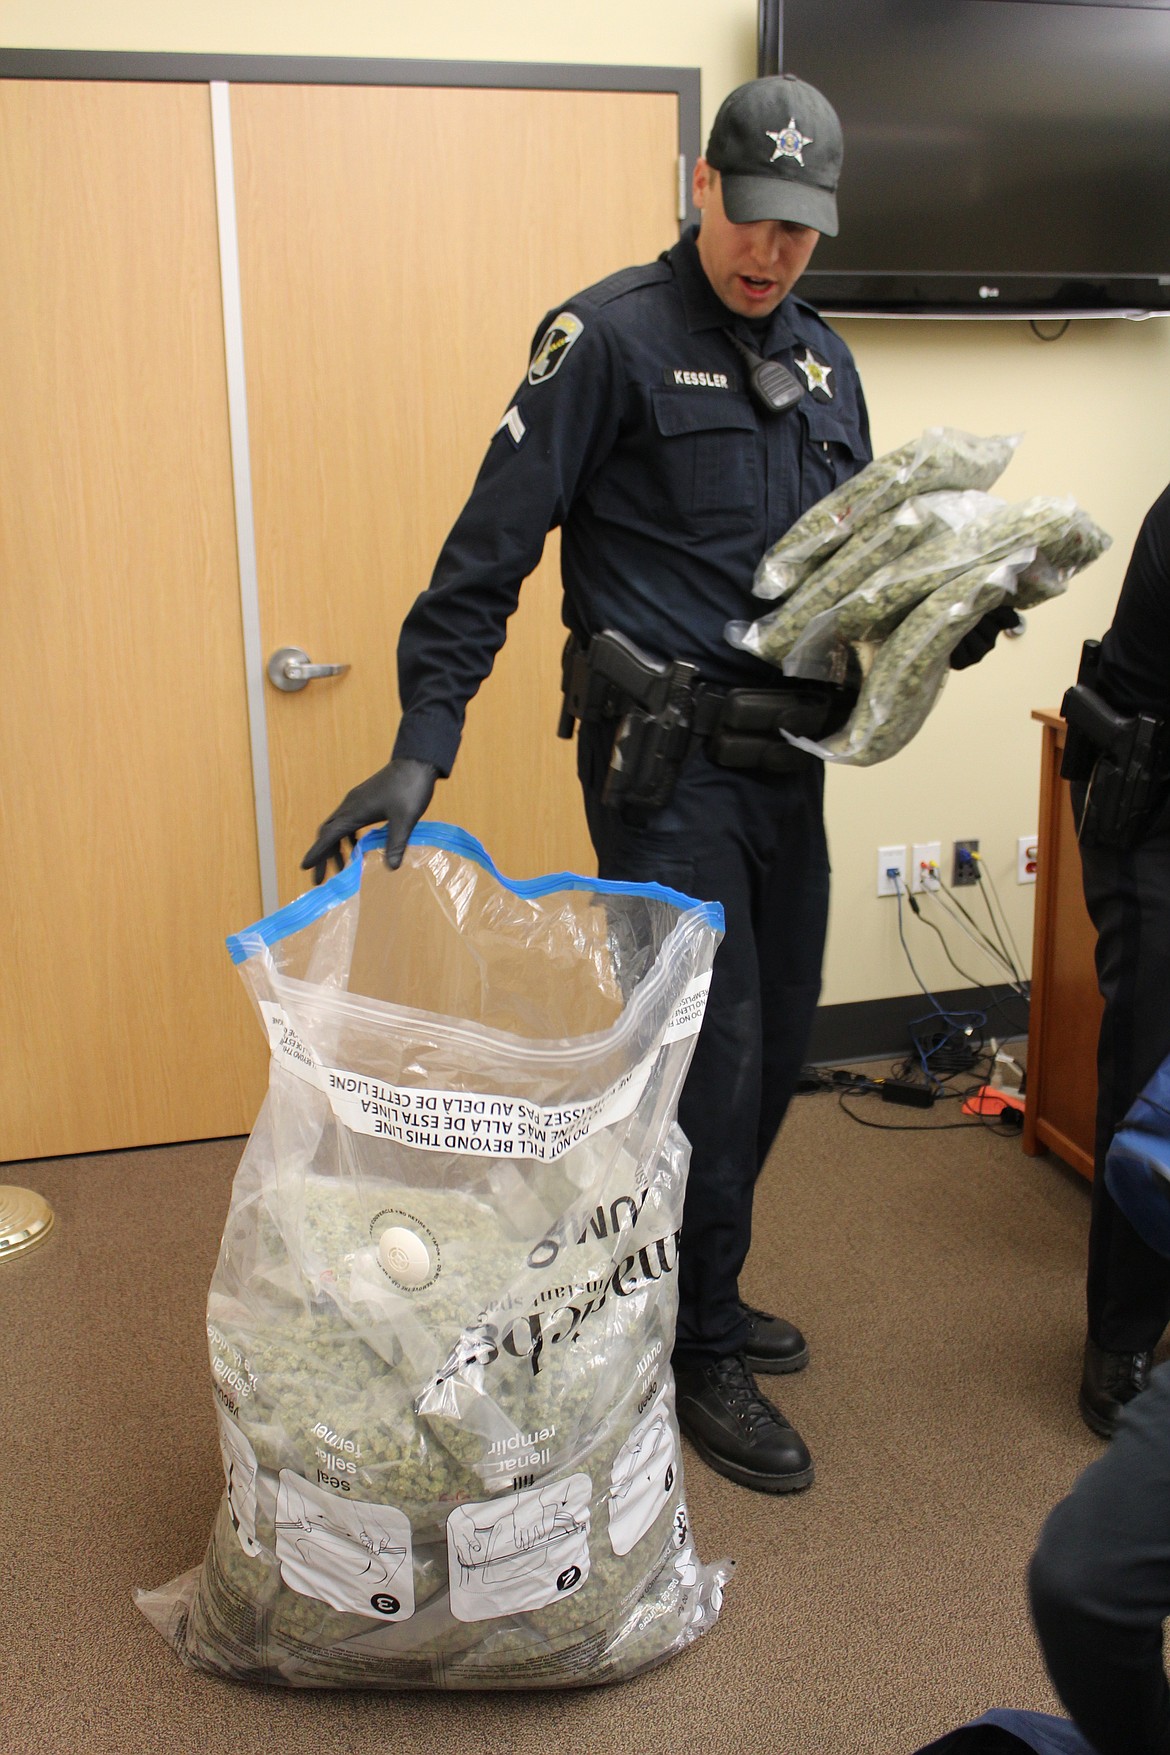 Cpl. Kevin Kessler removes storage bags of marijuana from a much larger bag to stack them. Kessler and his drug detection K9, Ace, are residents of the Silver Valley and have been instrumental in several trafficking busts over the years.